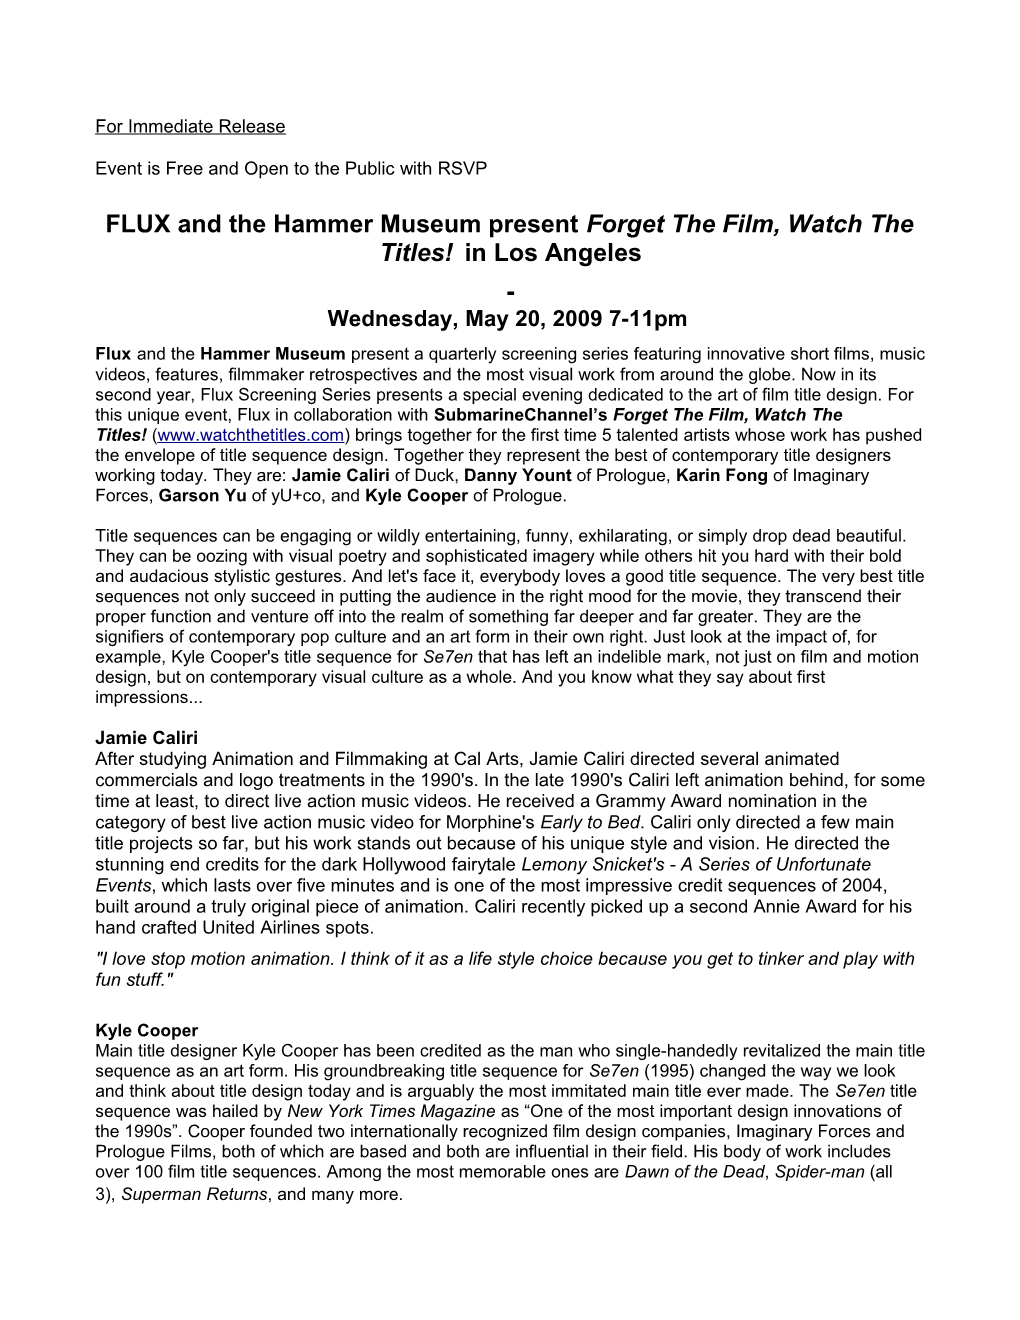 FLUX and the Hammer Museum Present Forget the Film, Watch the Titles!In Los Angeles